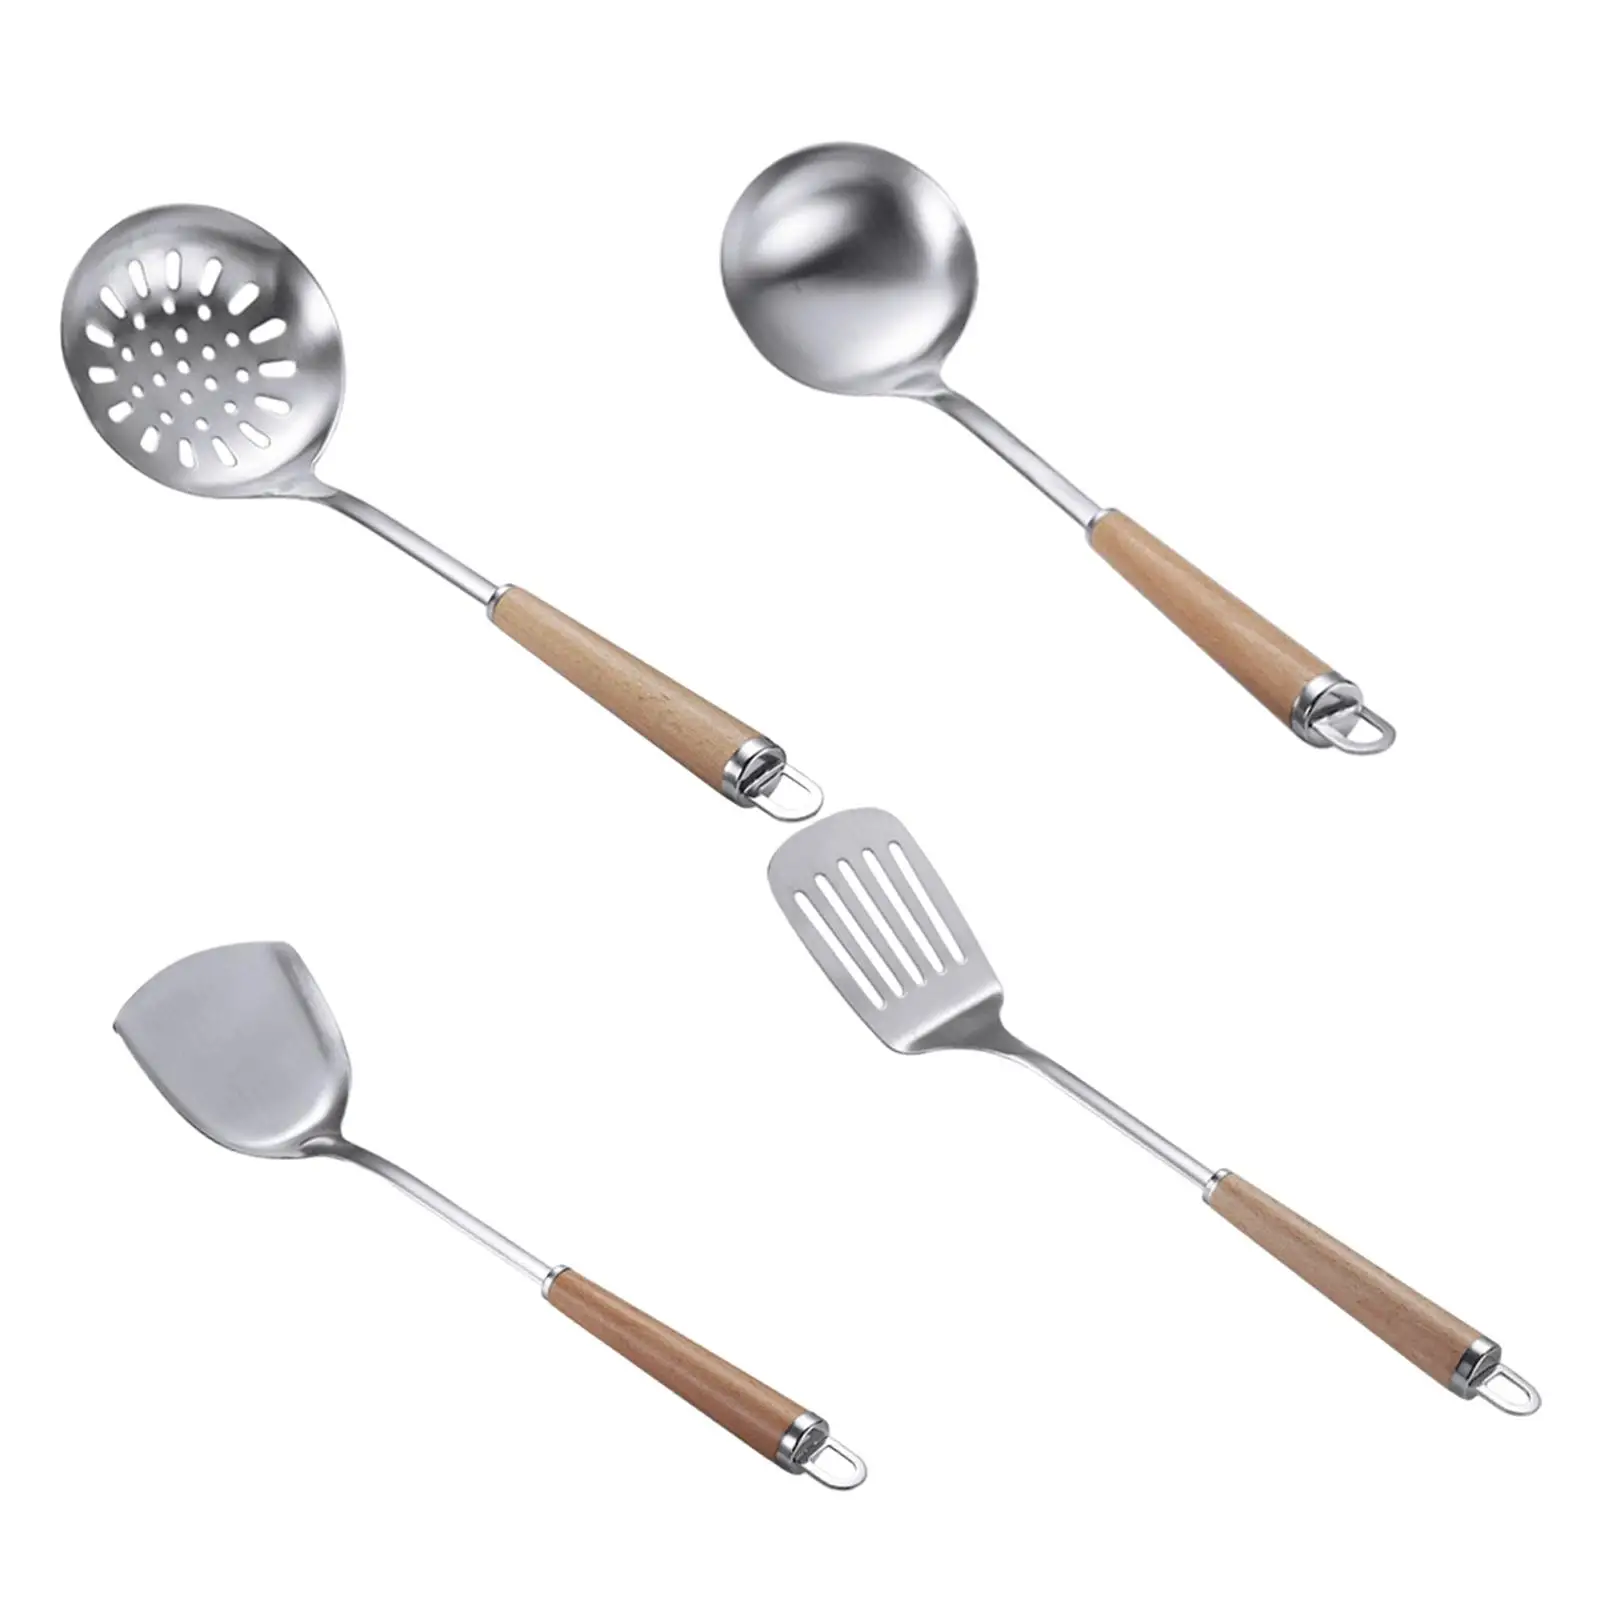 Stainless Steel Cooking Utensils Convenient Multifunctional Practical Cookware for Cooking Kitchen Camping Picnic Restaurant